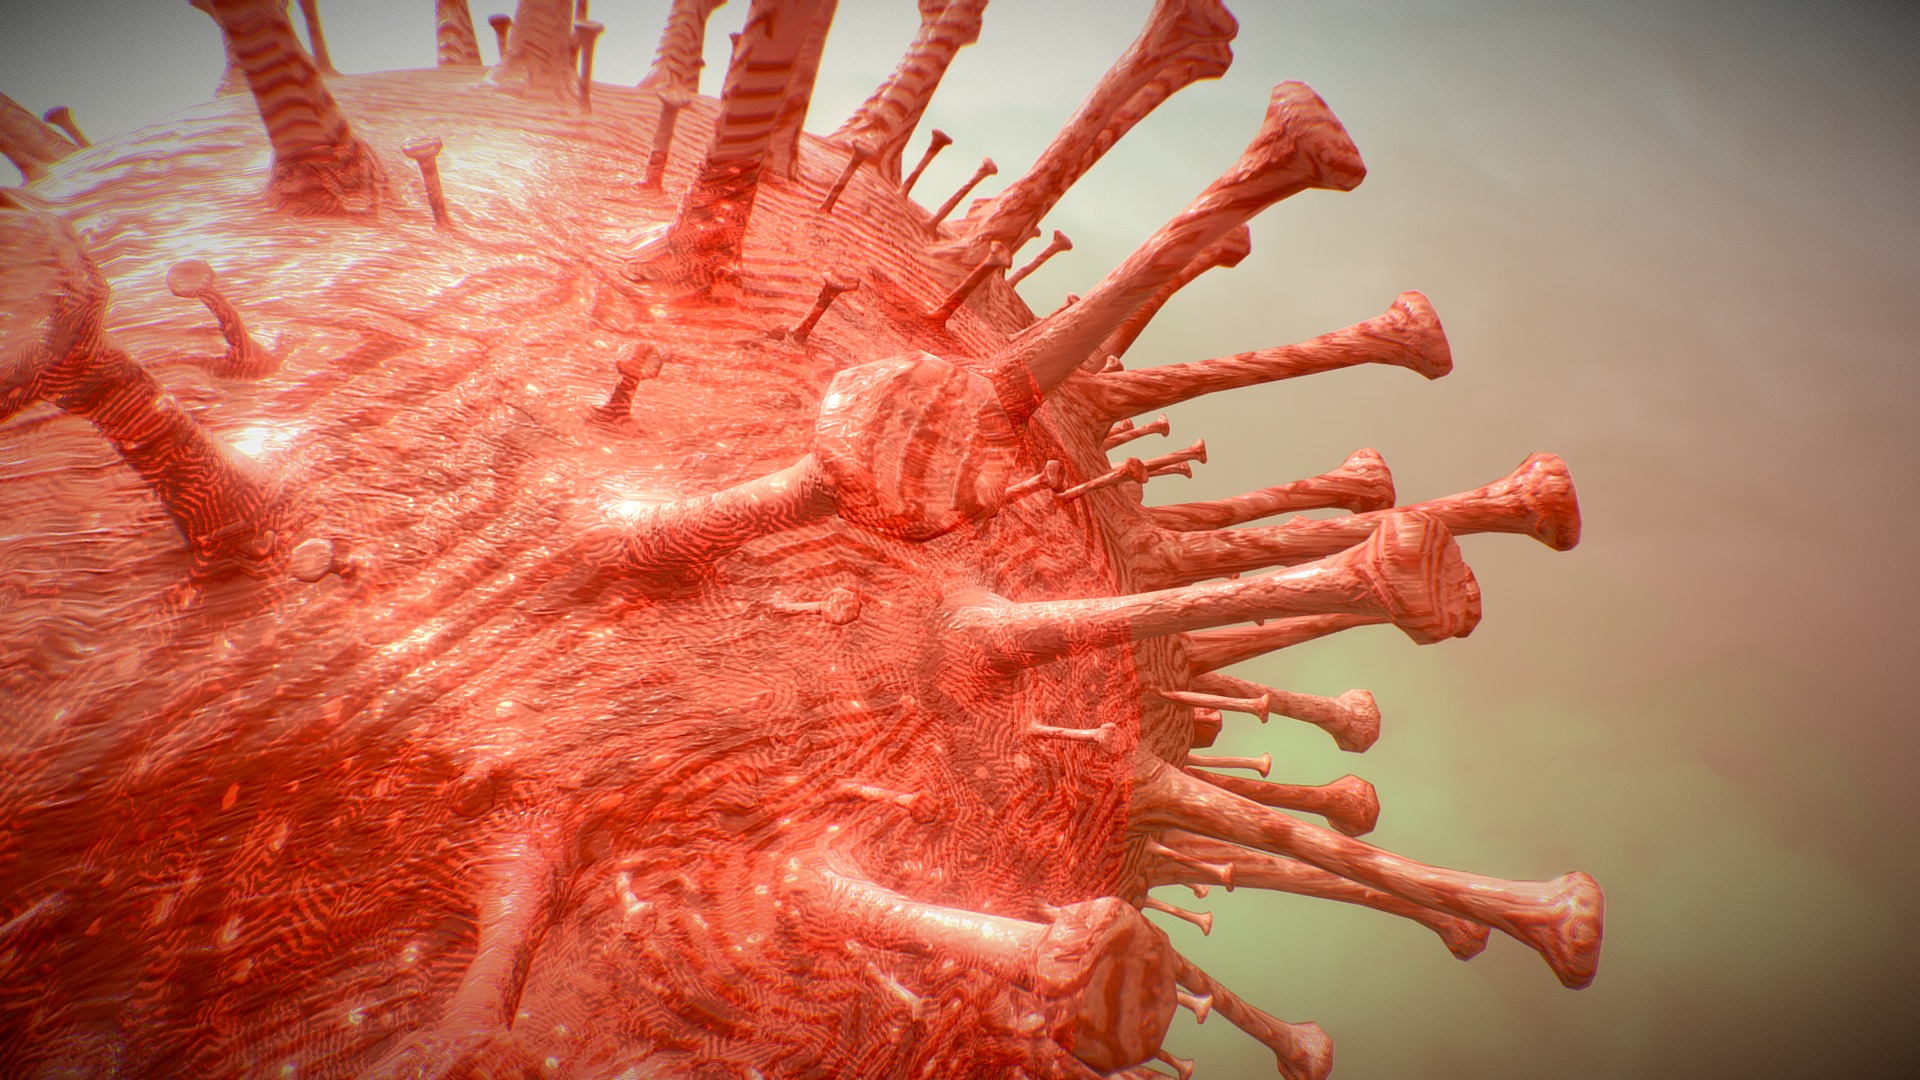 3D model Corona Virus animated COVID-19 PBR 4K texures - This is a 3D model of the Corona Virus animated COVID-19 PBR 4K texures. The 3D model is about a close-up of a red crab.